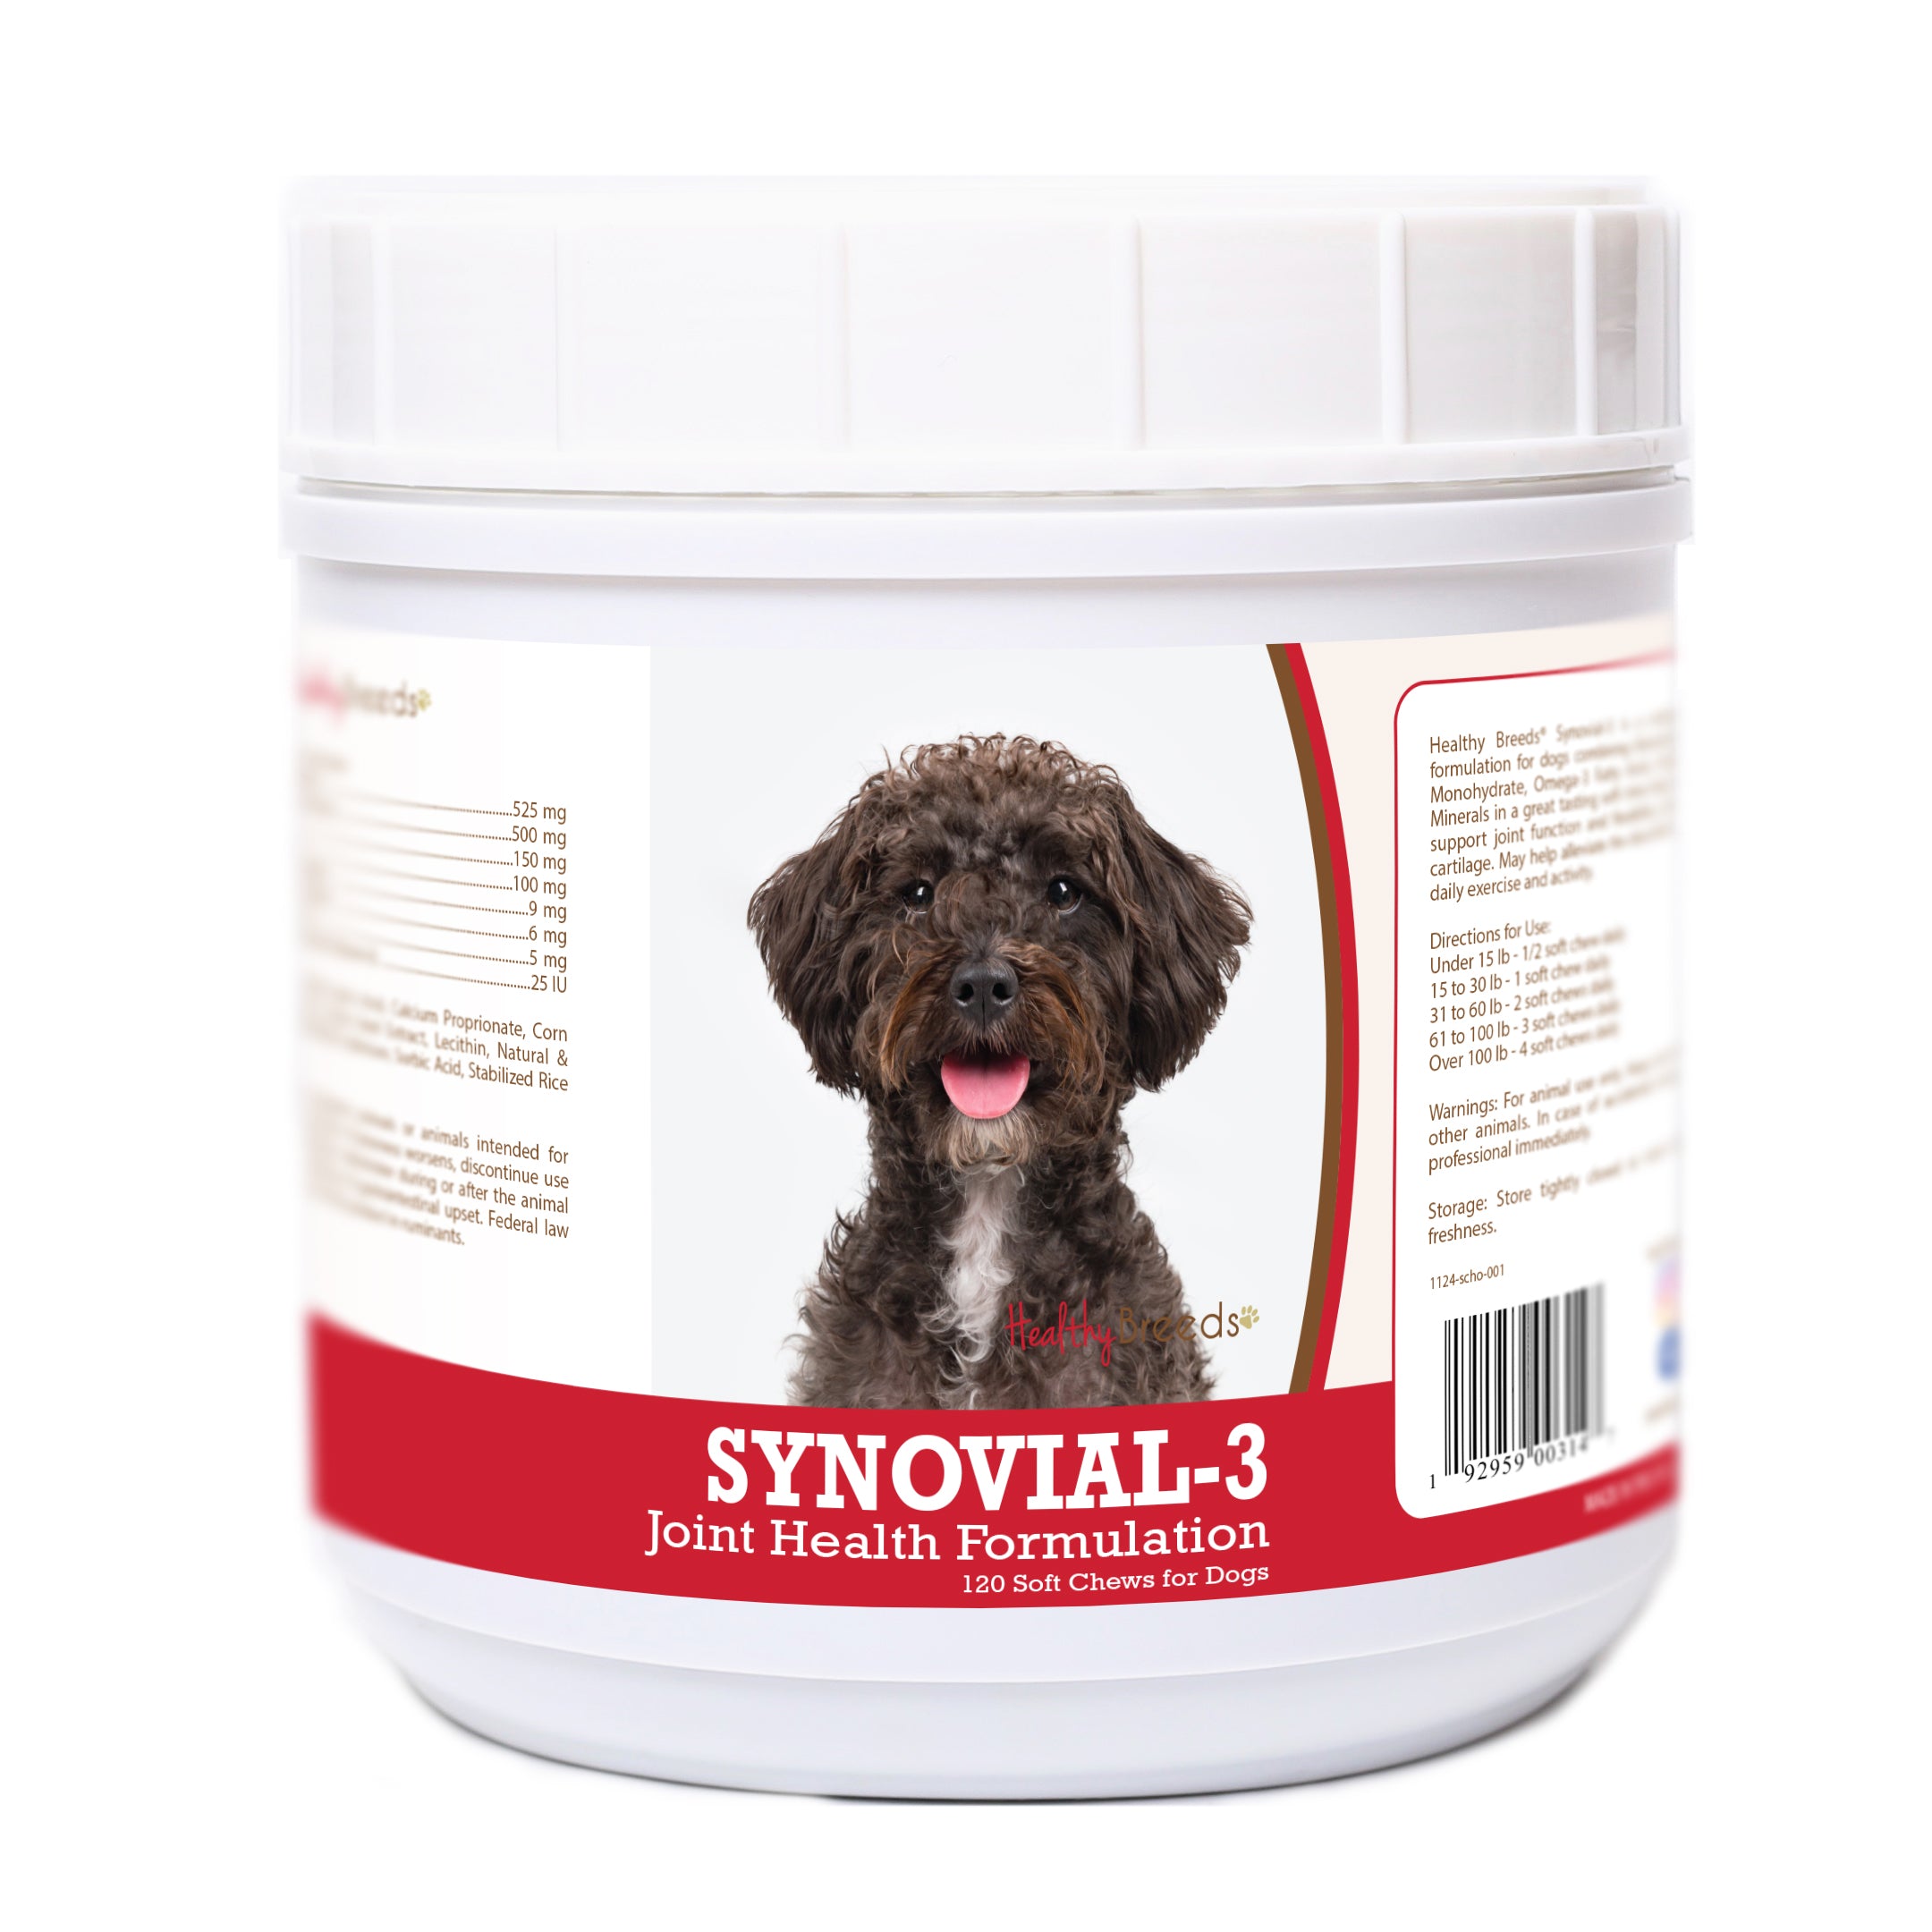 Schnoodle Synovial-3 Joint Health Formulation Soft Chews 120 Count